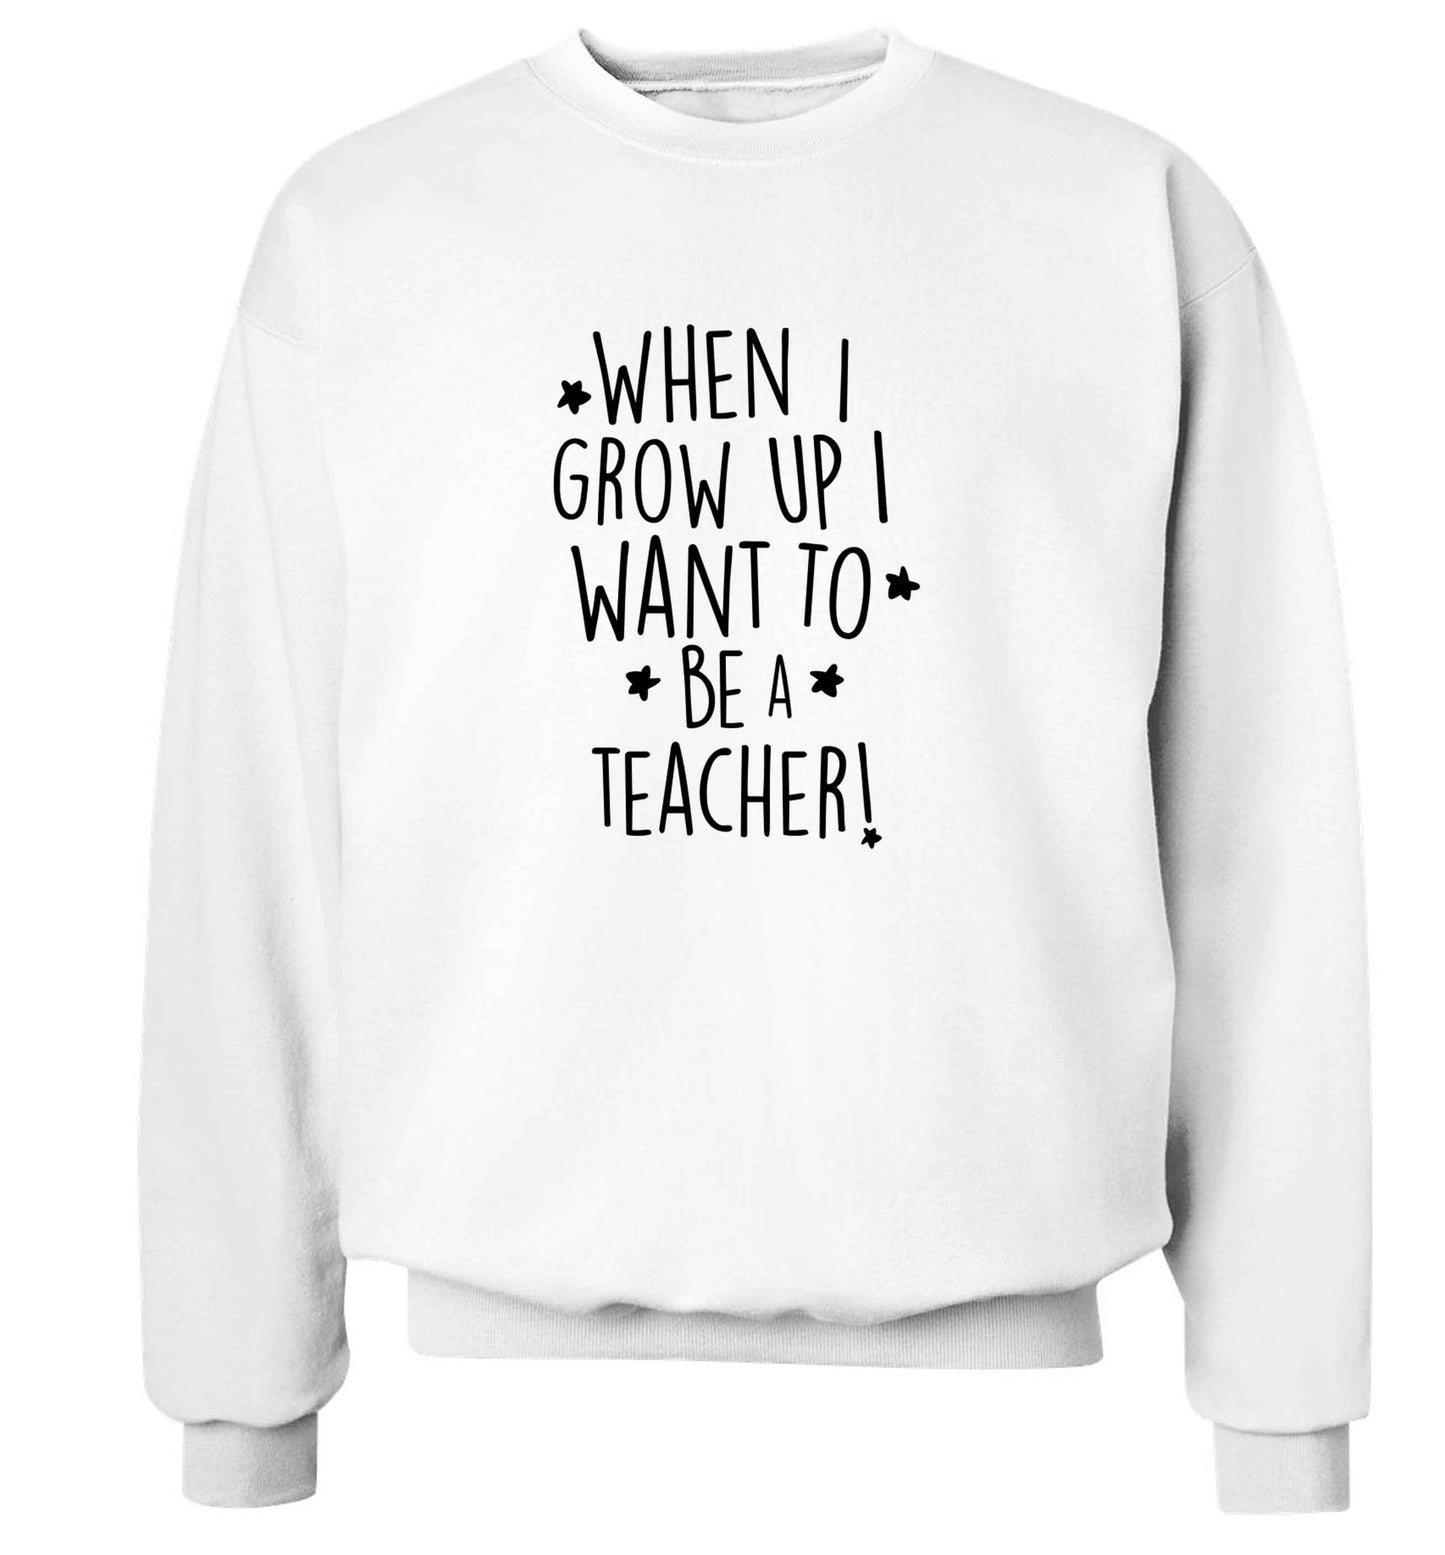 When I grow up I want to be a teacher adult's unisex white sweater 2XL